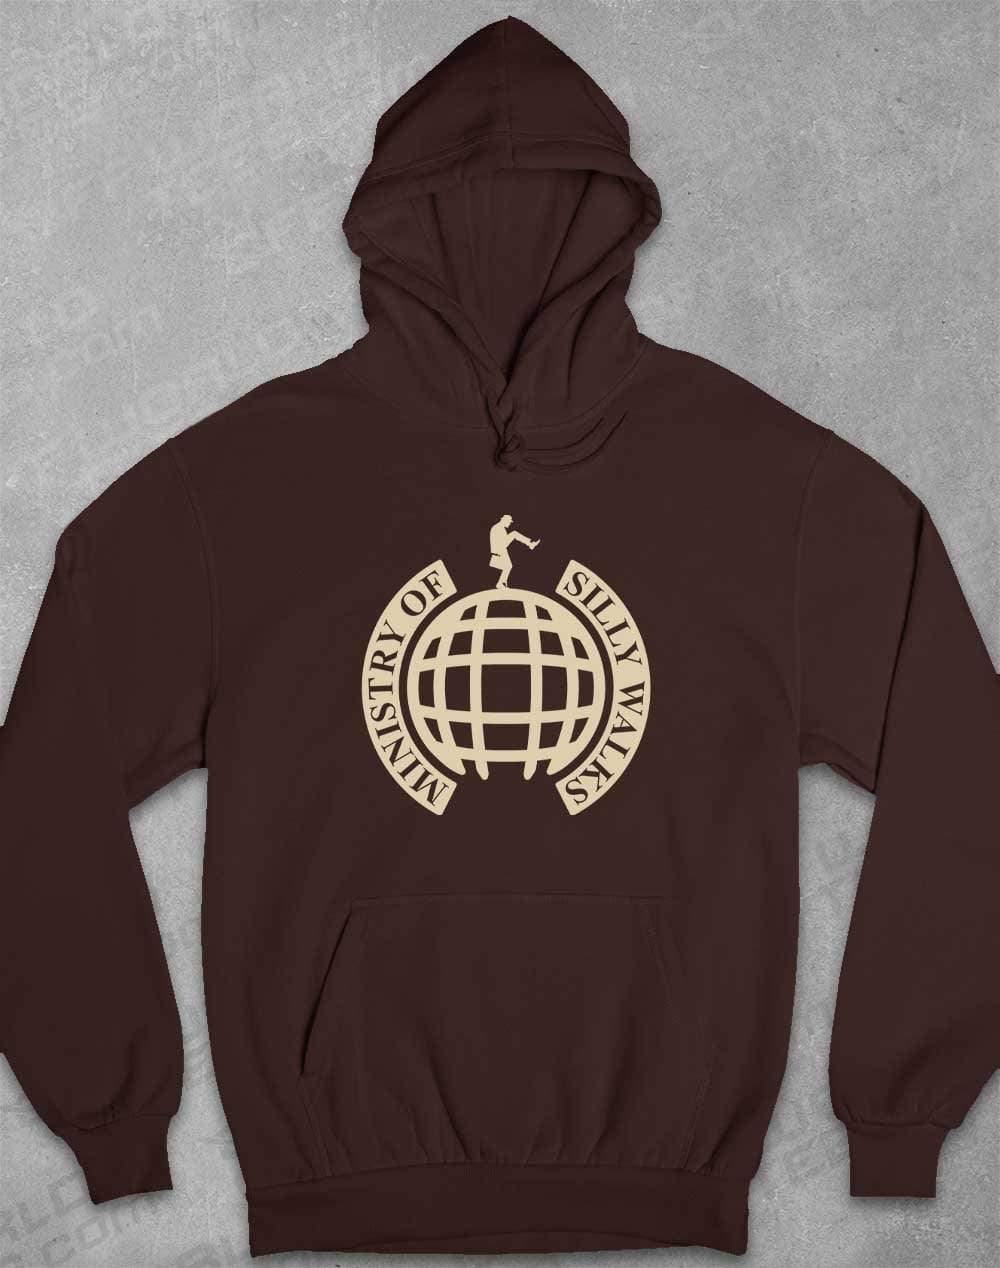 Ministry of Silly Walks Hoodie XS / Hot Chocolate  - Off World Tees